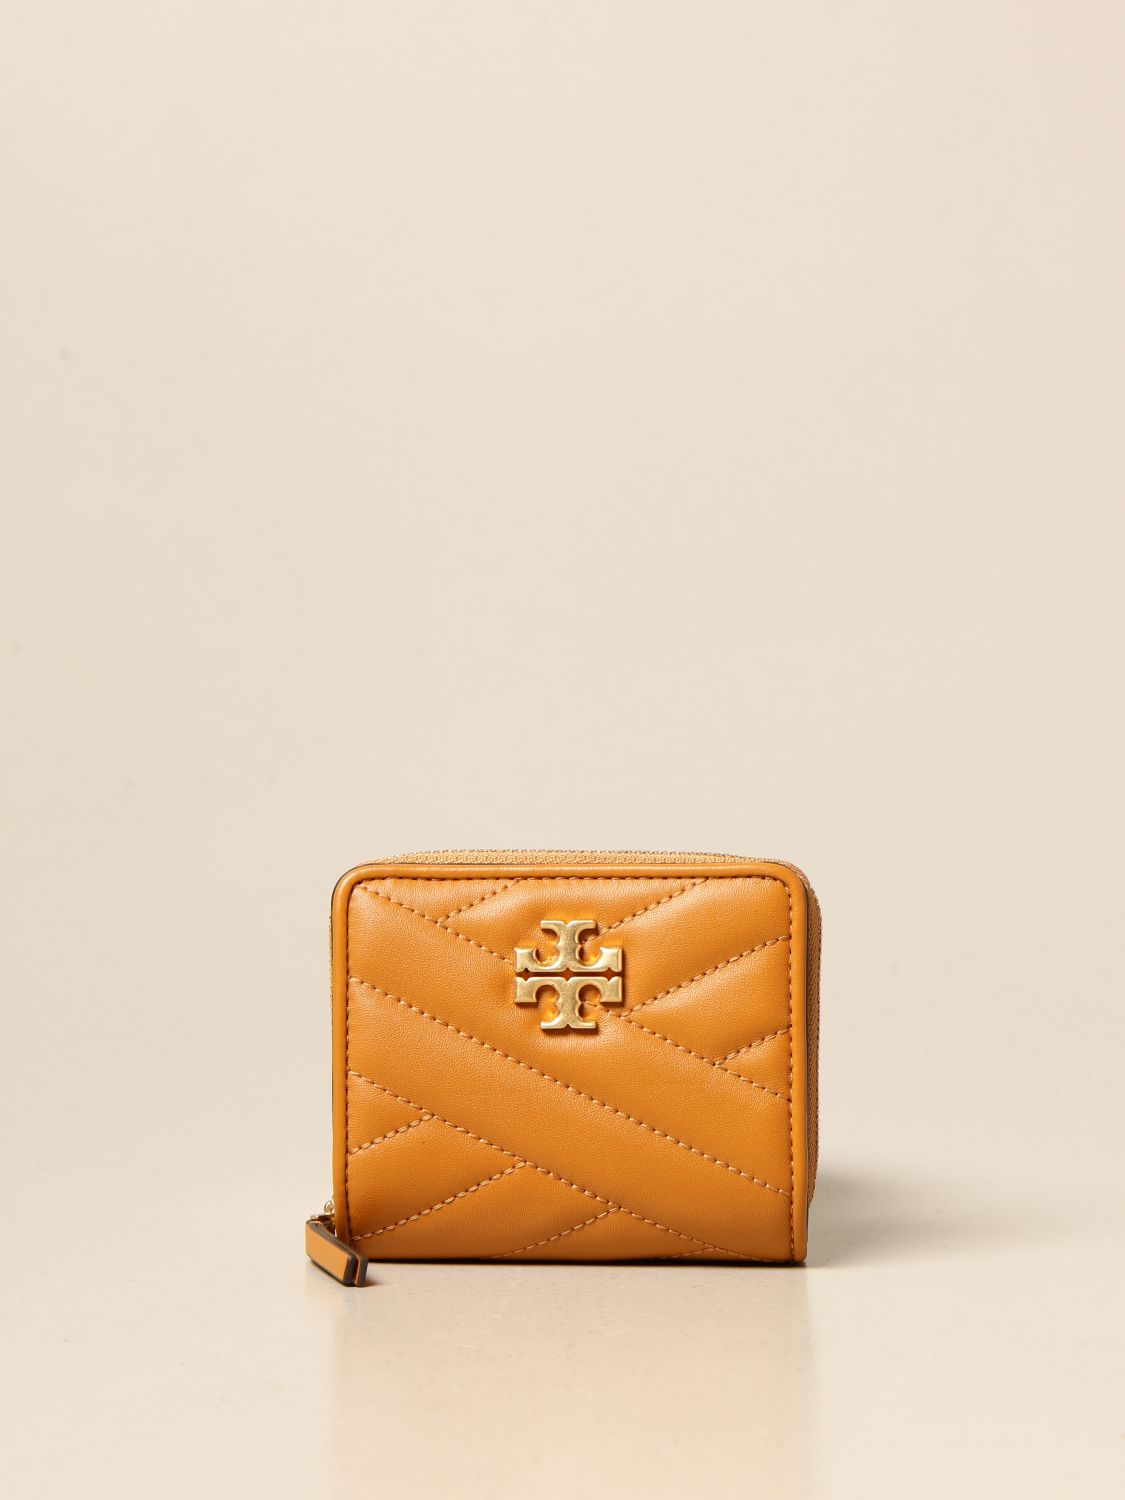 TORY BURCH: Kira wallet in quilted leather with metallic emblem - Tangerine  | Tory Burch wallet 56820 online on 